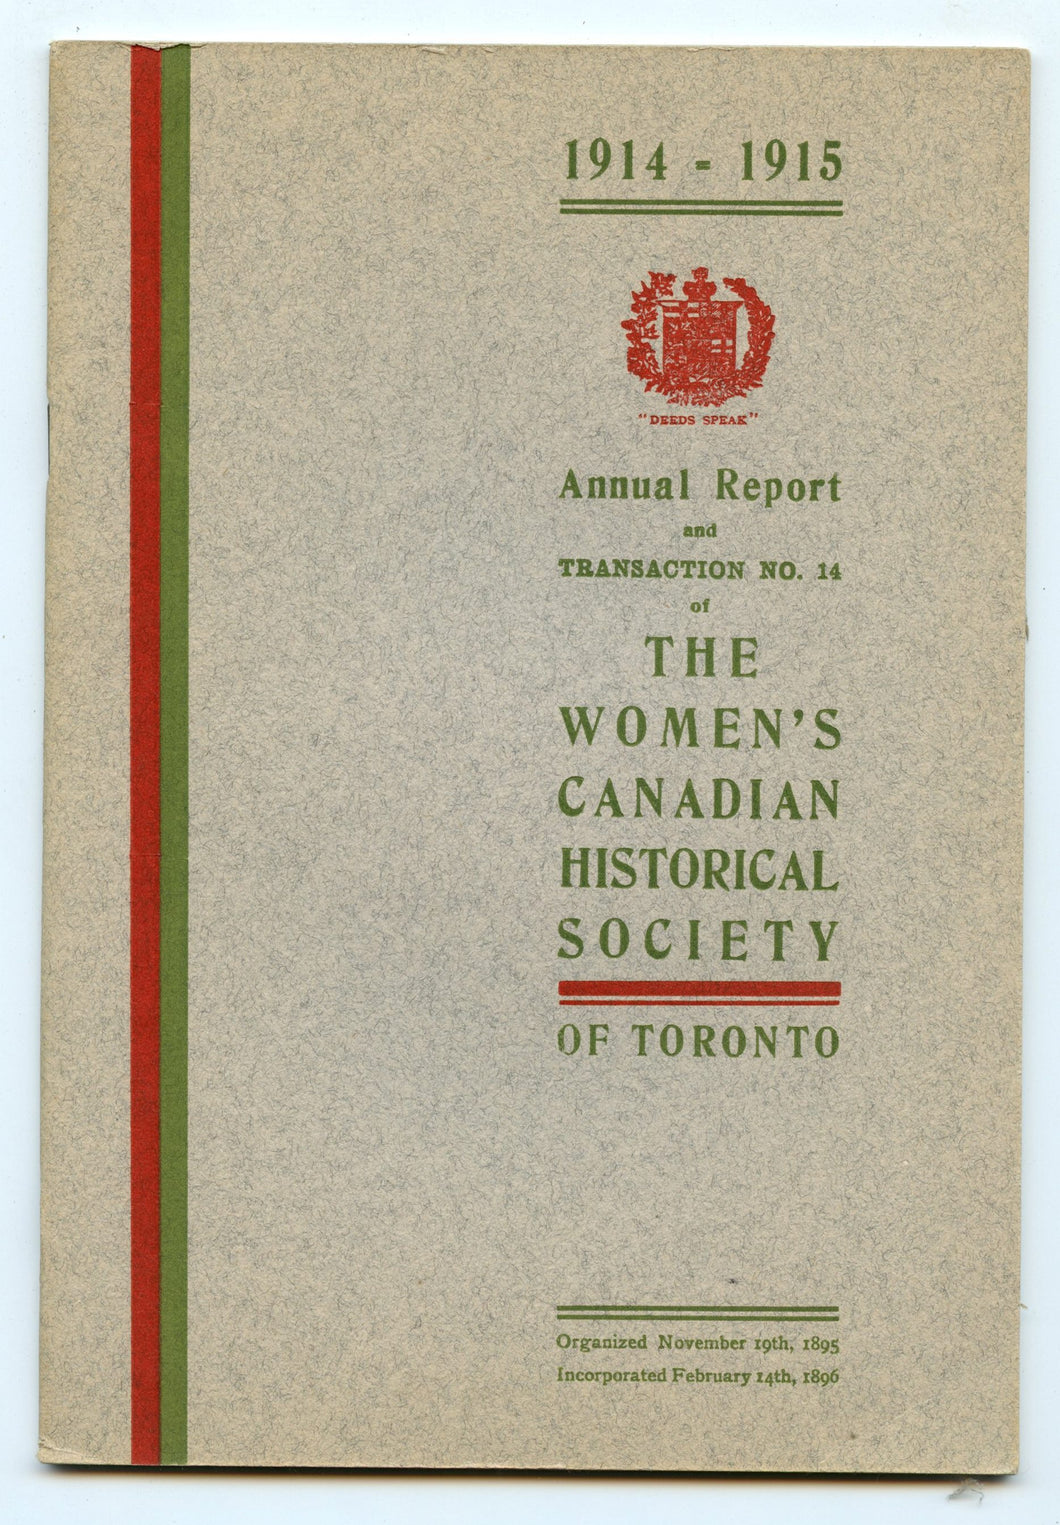 Annual Report and Transaction No. 14 of The Women's Canadian Historical Society of Toronto, 1914-1915